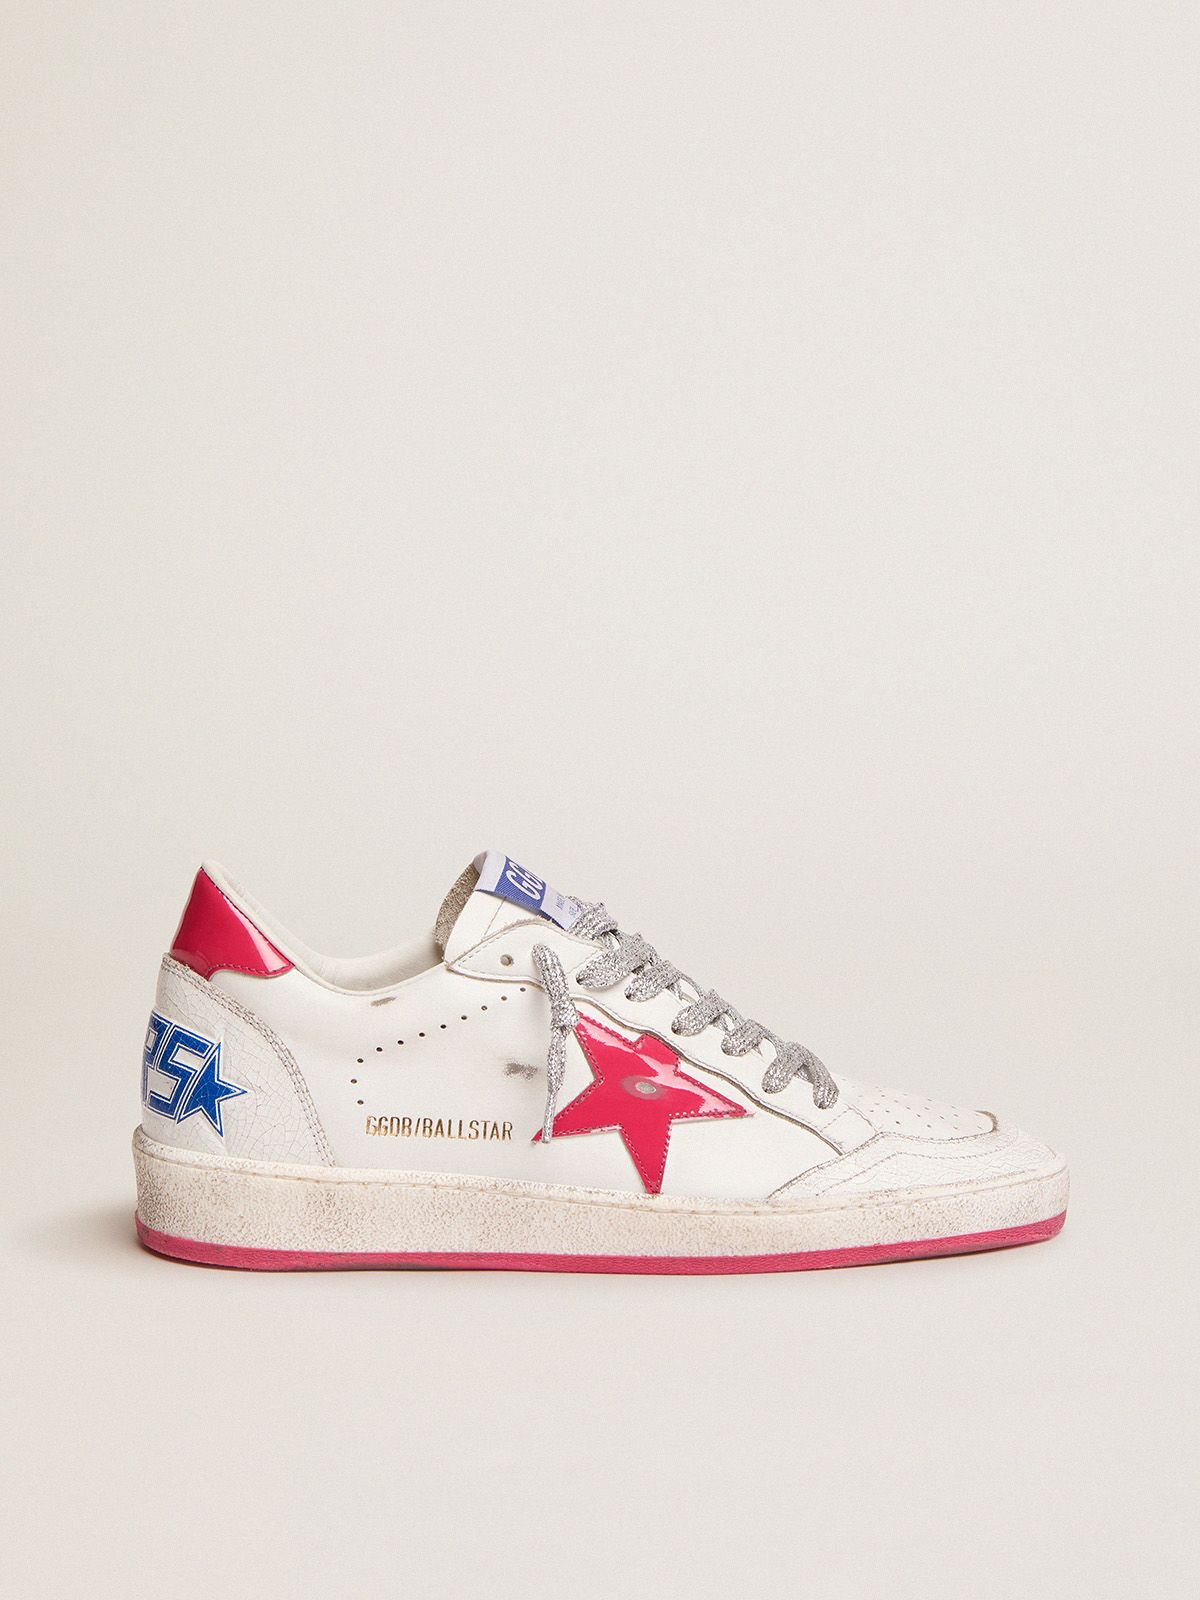 golden goose with LTD Ball red leather in Star detail white patent sneakers